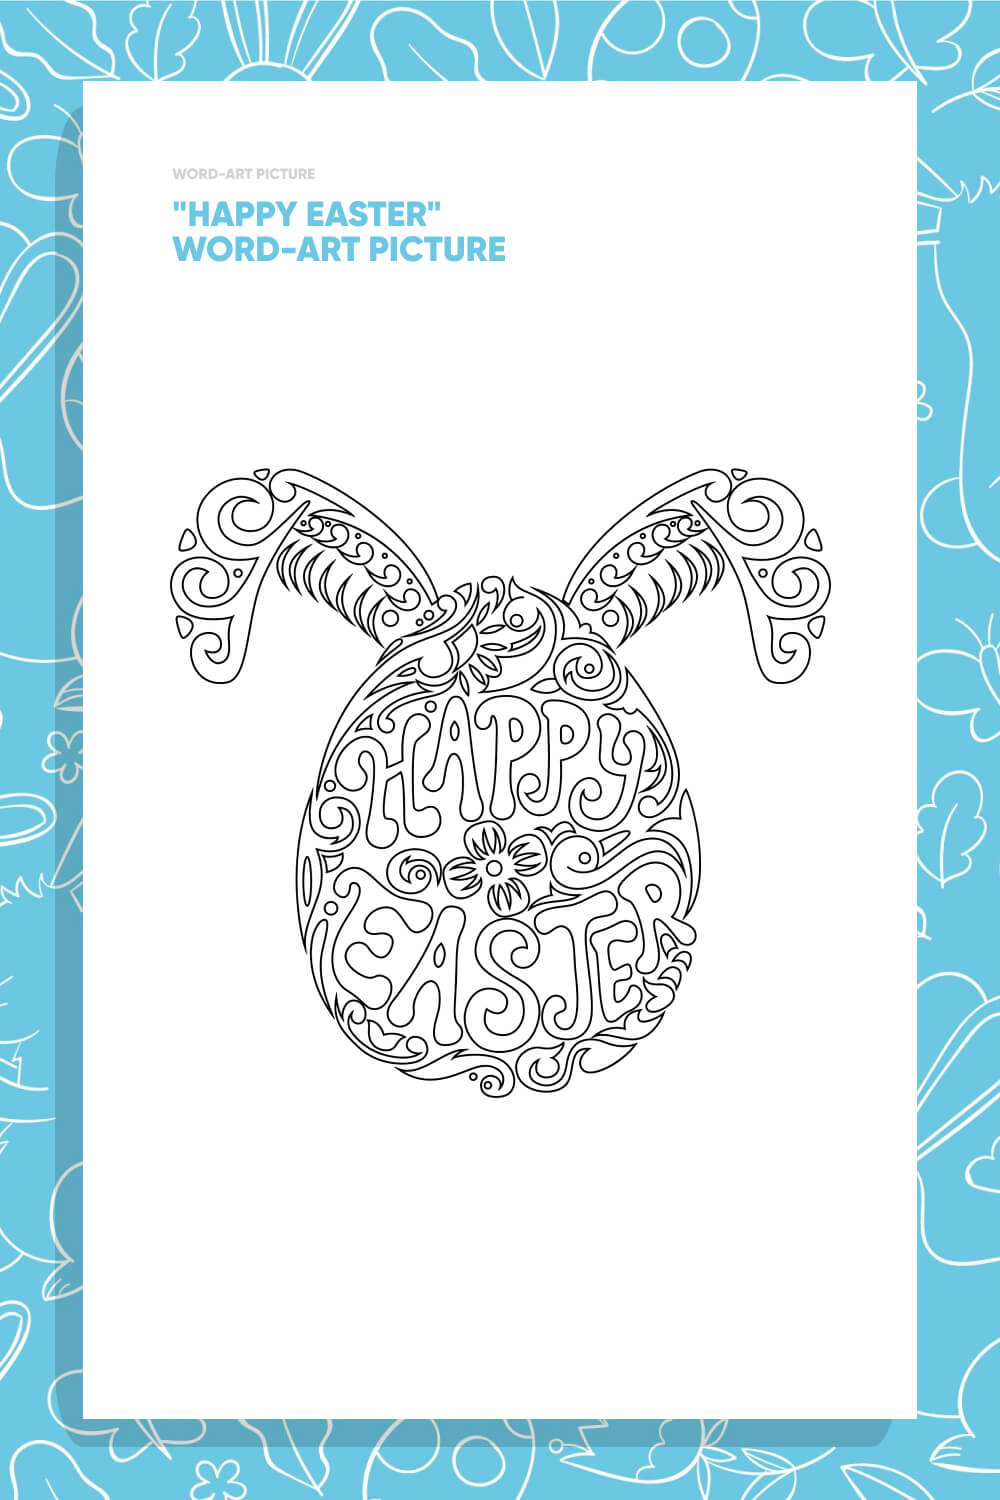 "Happy Easter" Word Art Picture pinterest.